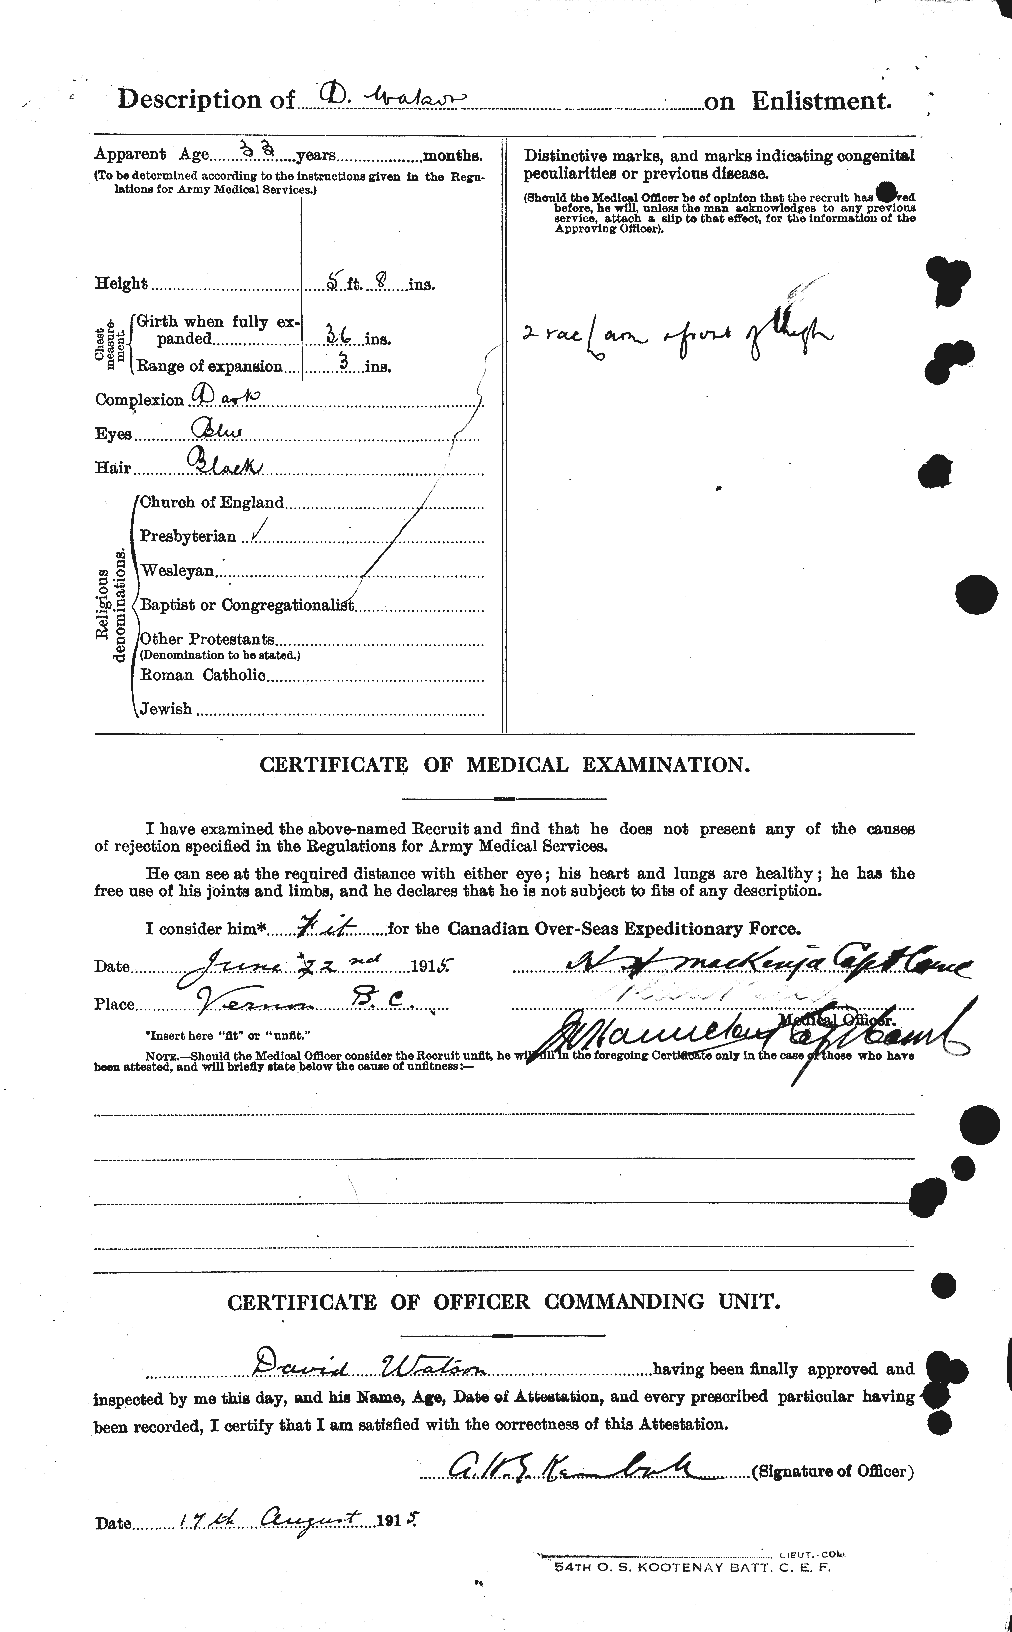 Personnel Records of the First World War - CEF 660364b